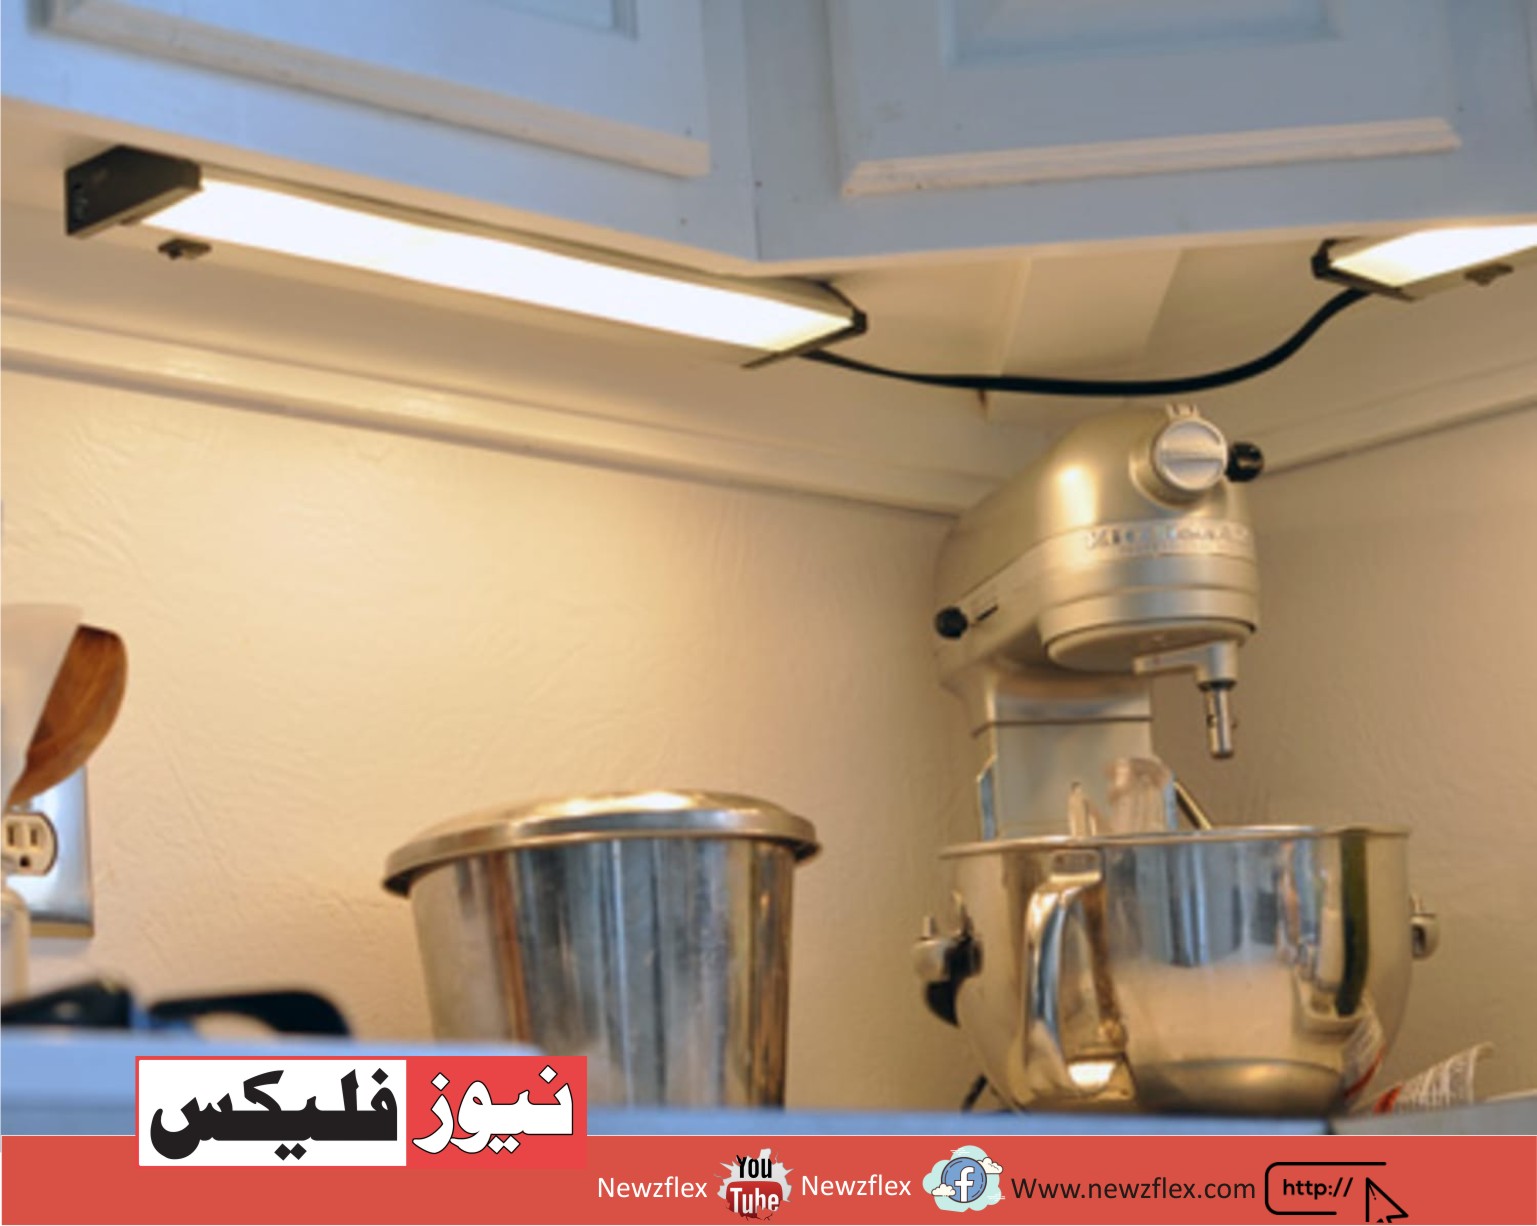 Types of Bulbs for Under-Cabinet Lighting